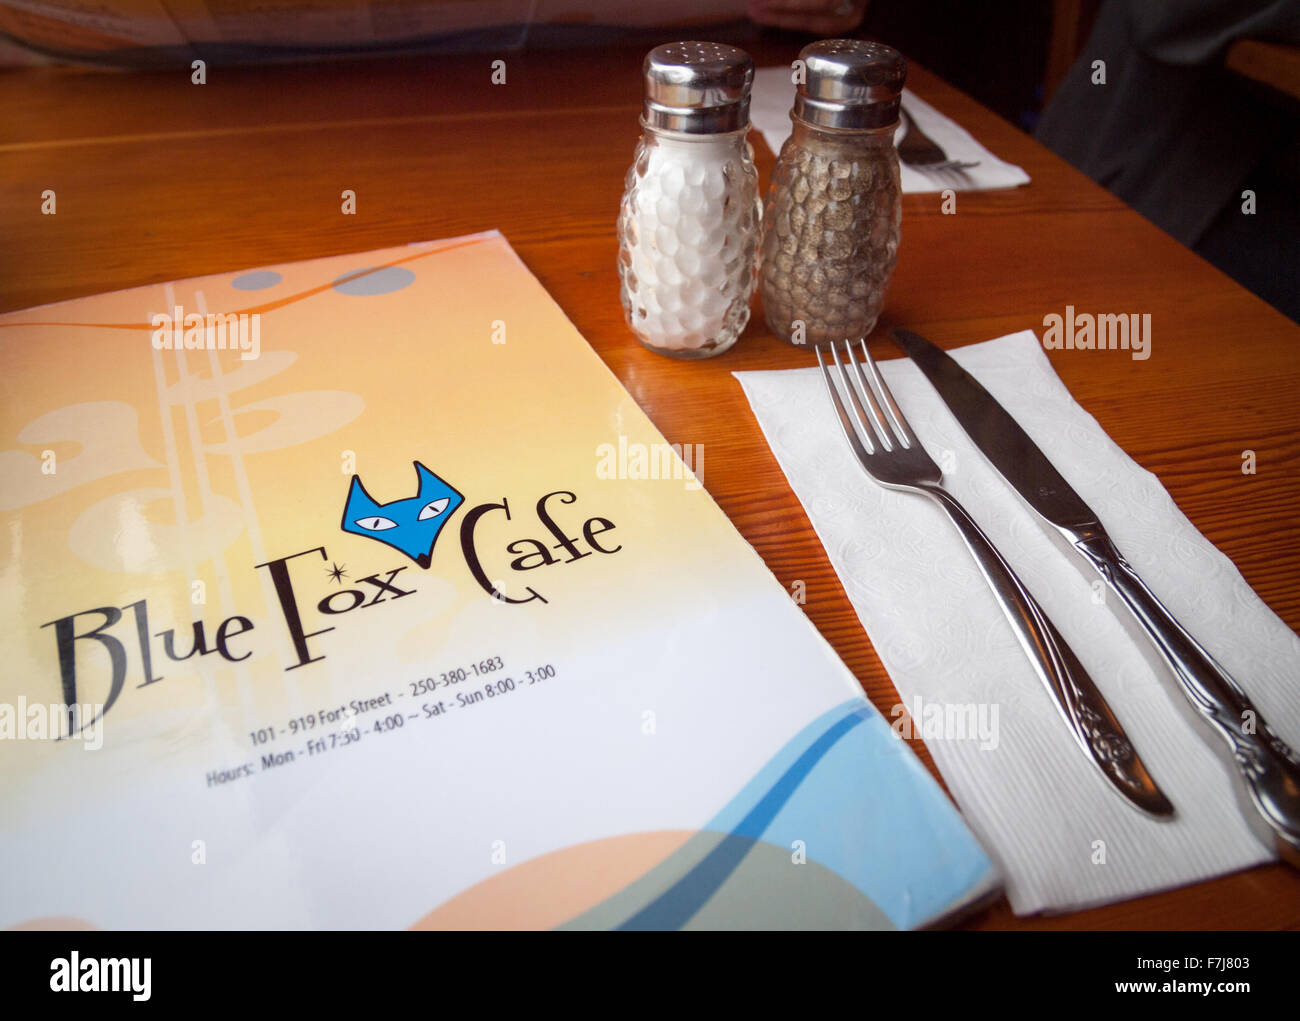 Fox Cafe High Resolution Stock Photography and Images - Alamy